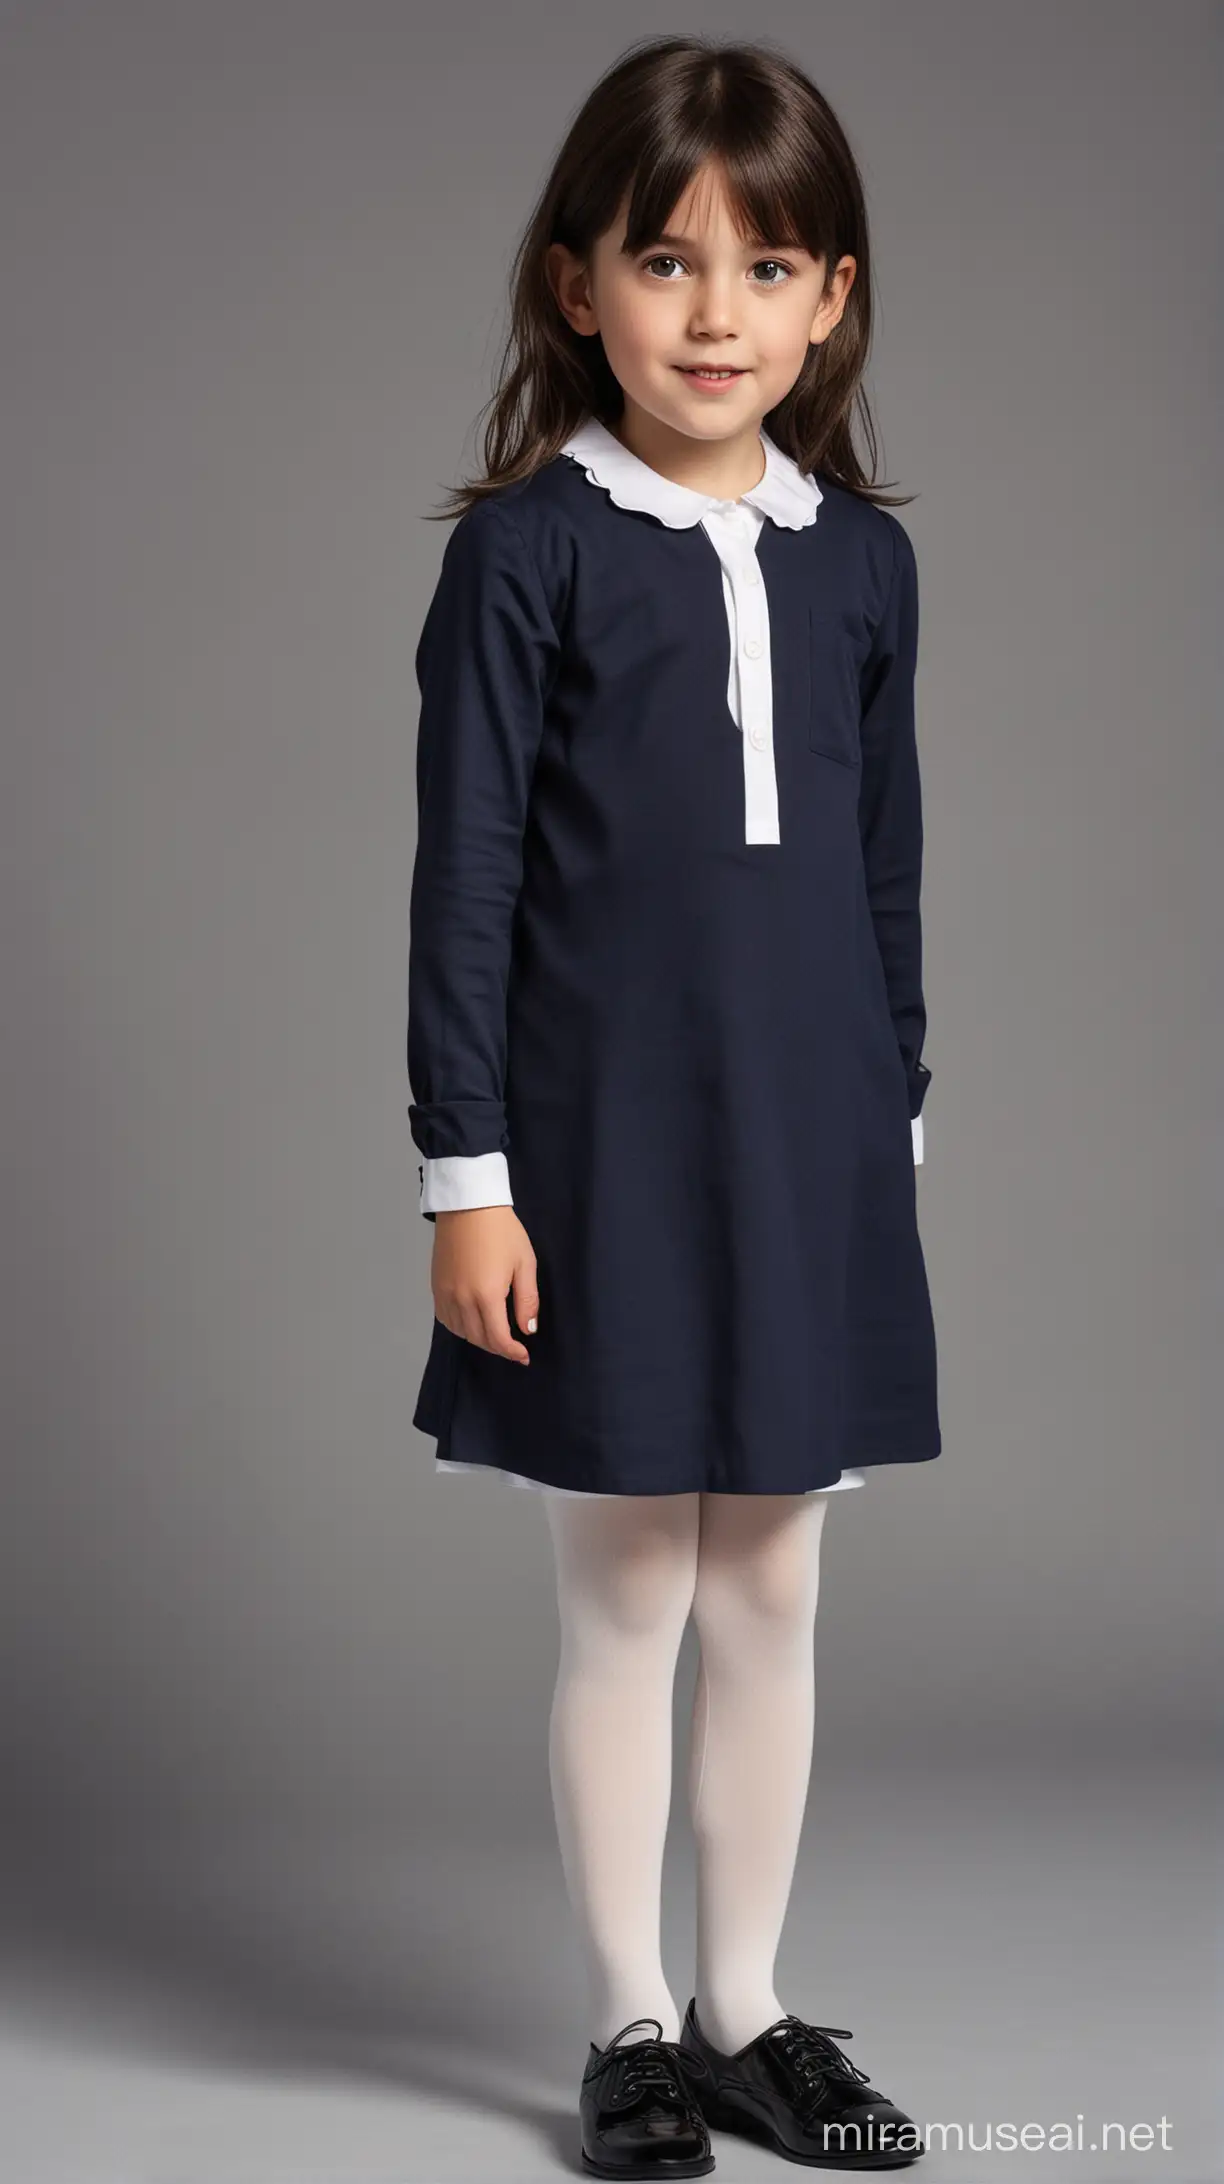 small girl wearing navy blue tunic over white shirt and tights on legs with black shoes, straight dark brown hair, realistic.